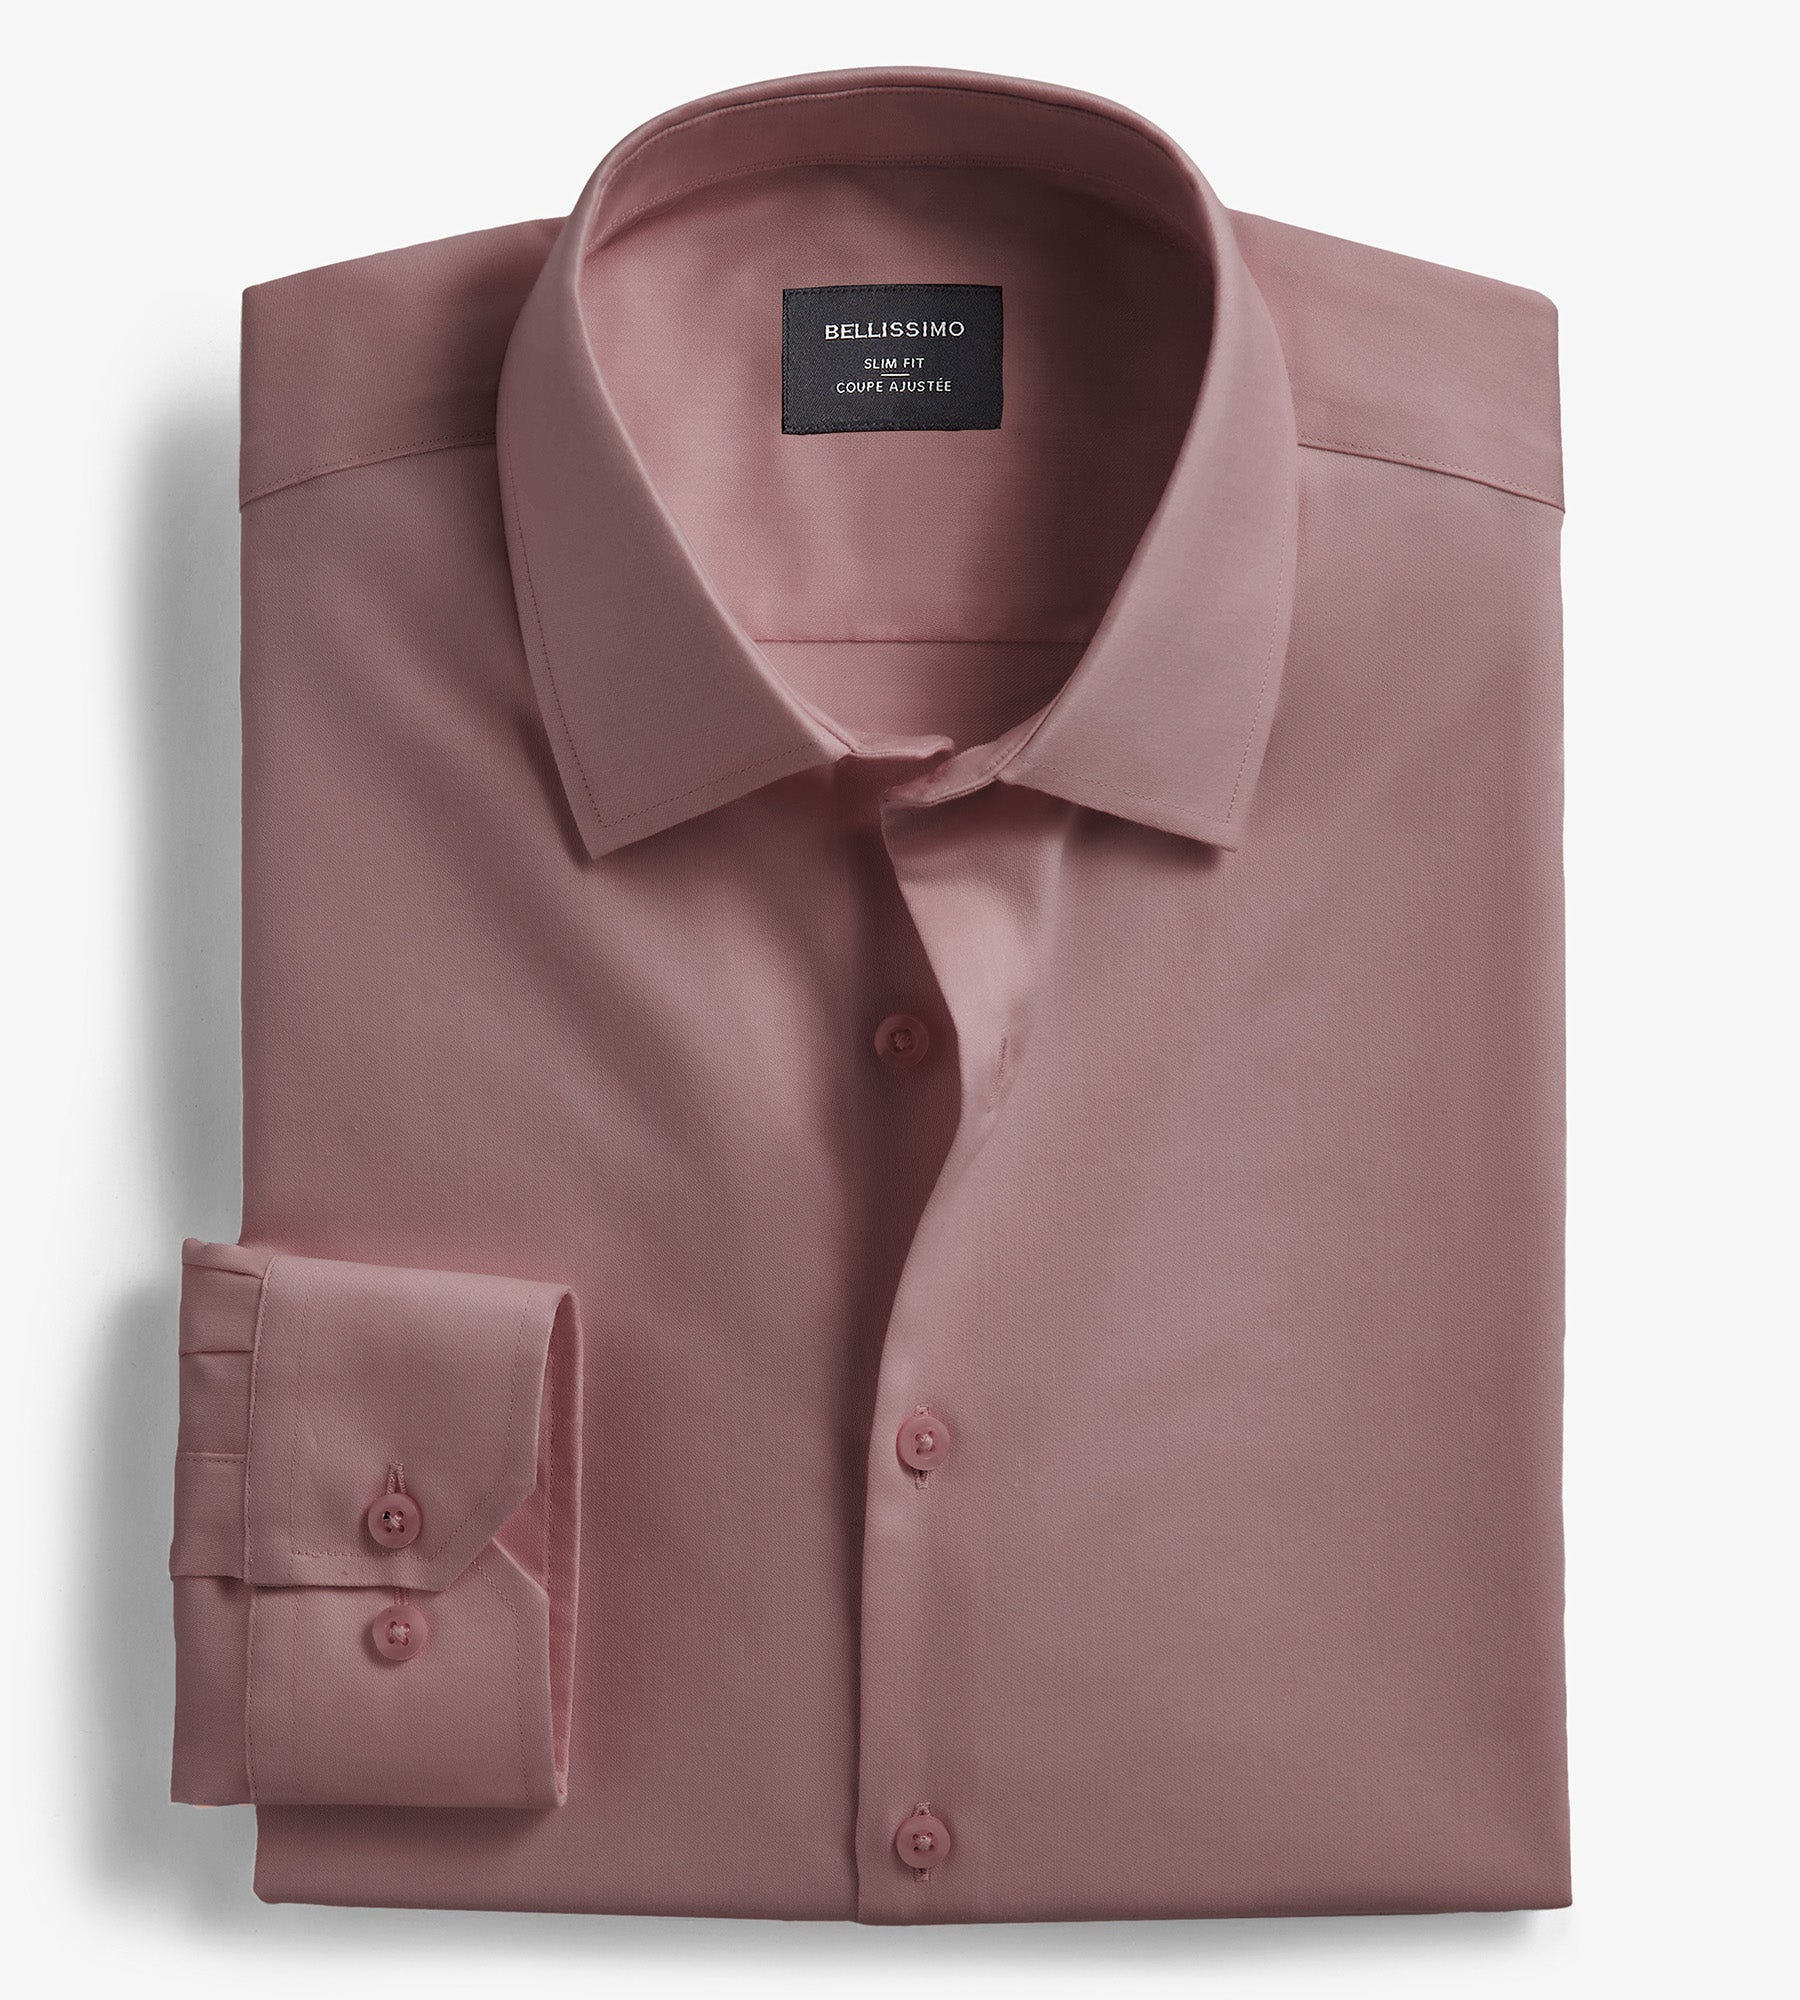 How to Buy a perfect fit Shirt Online – Vitruvien